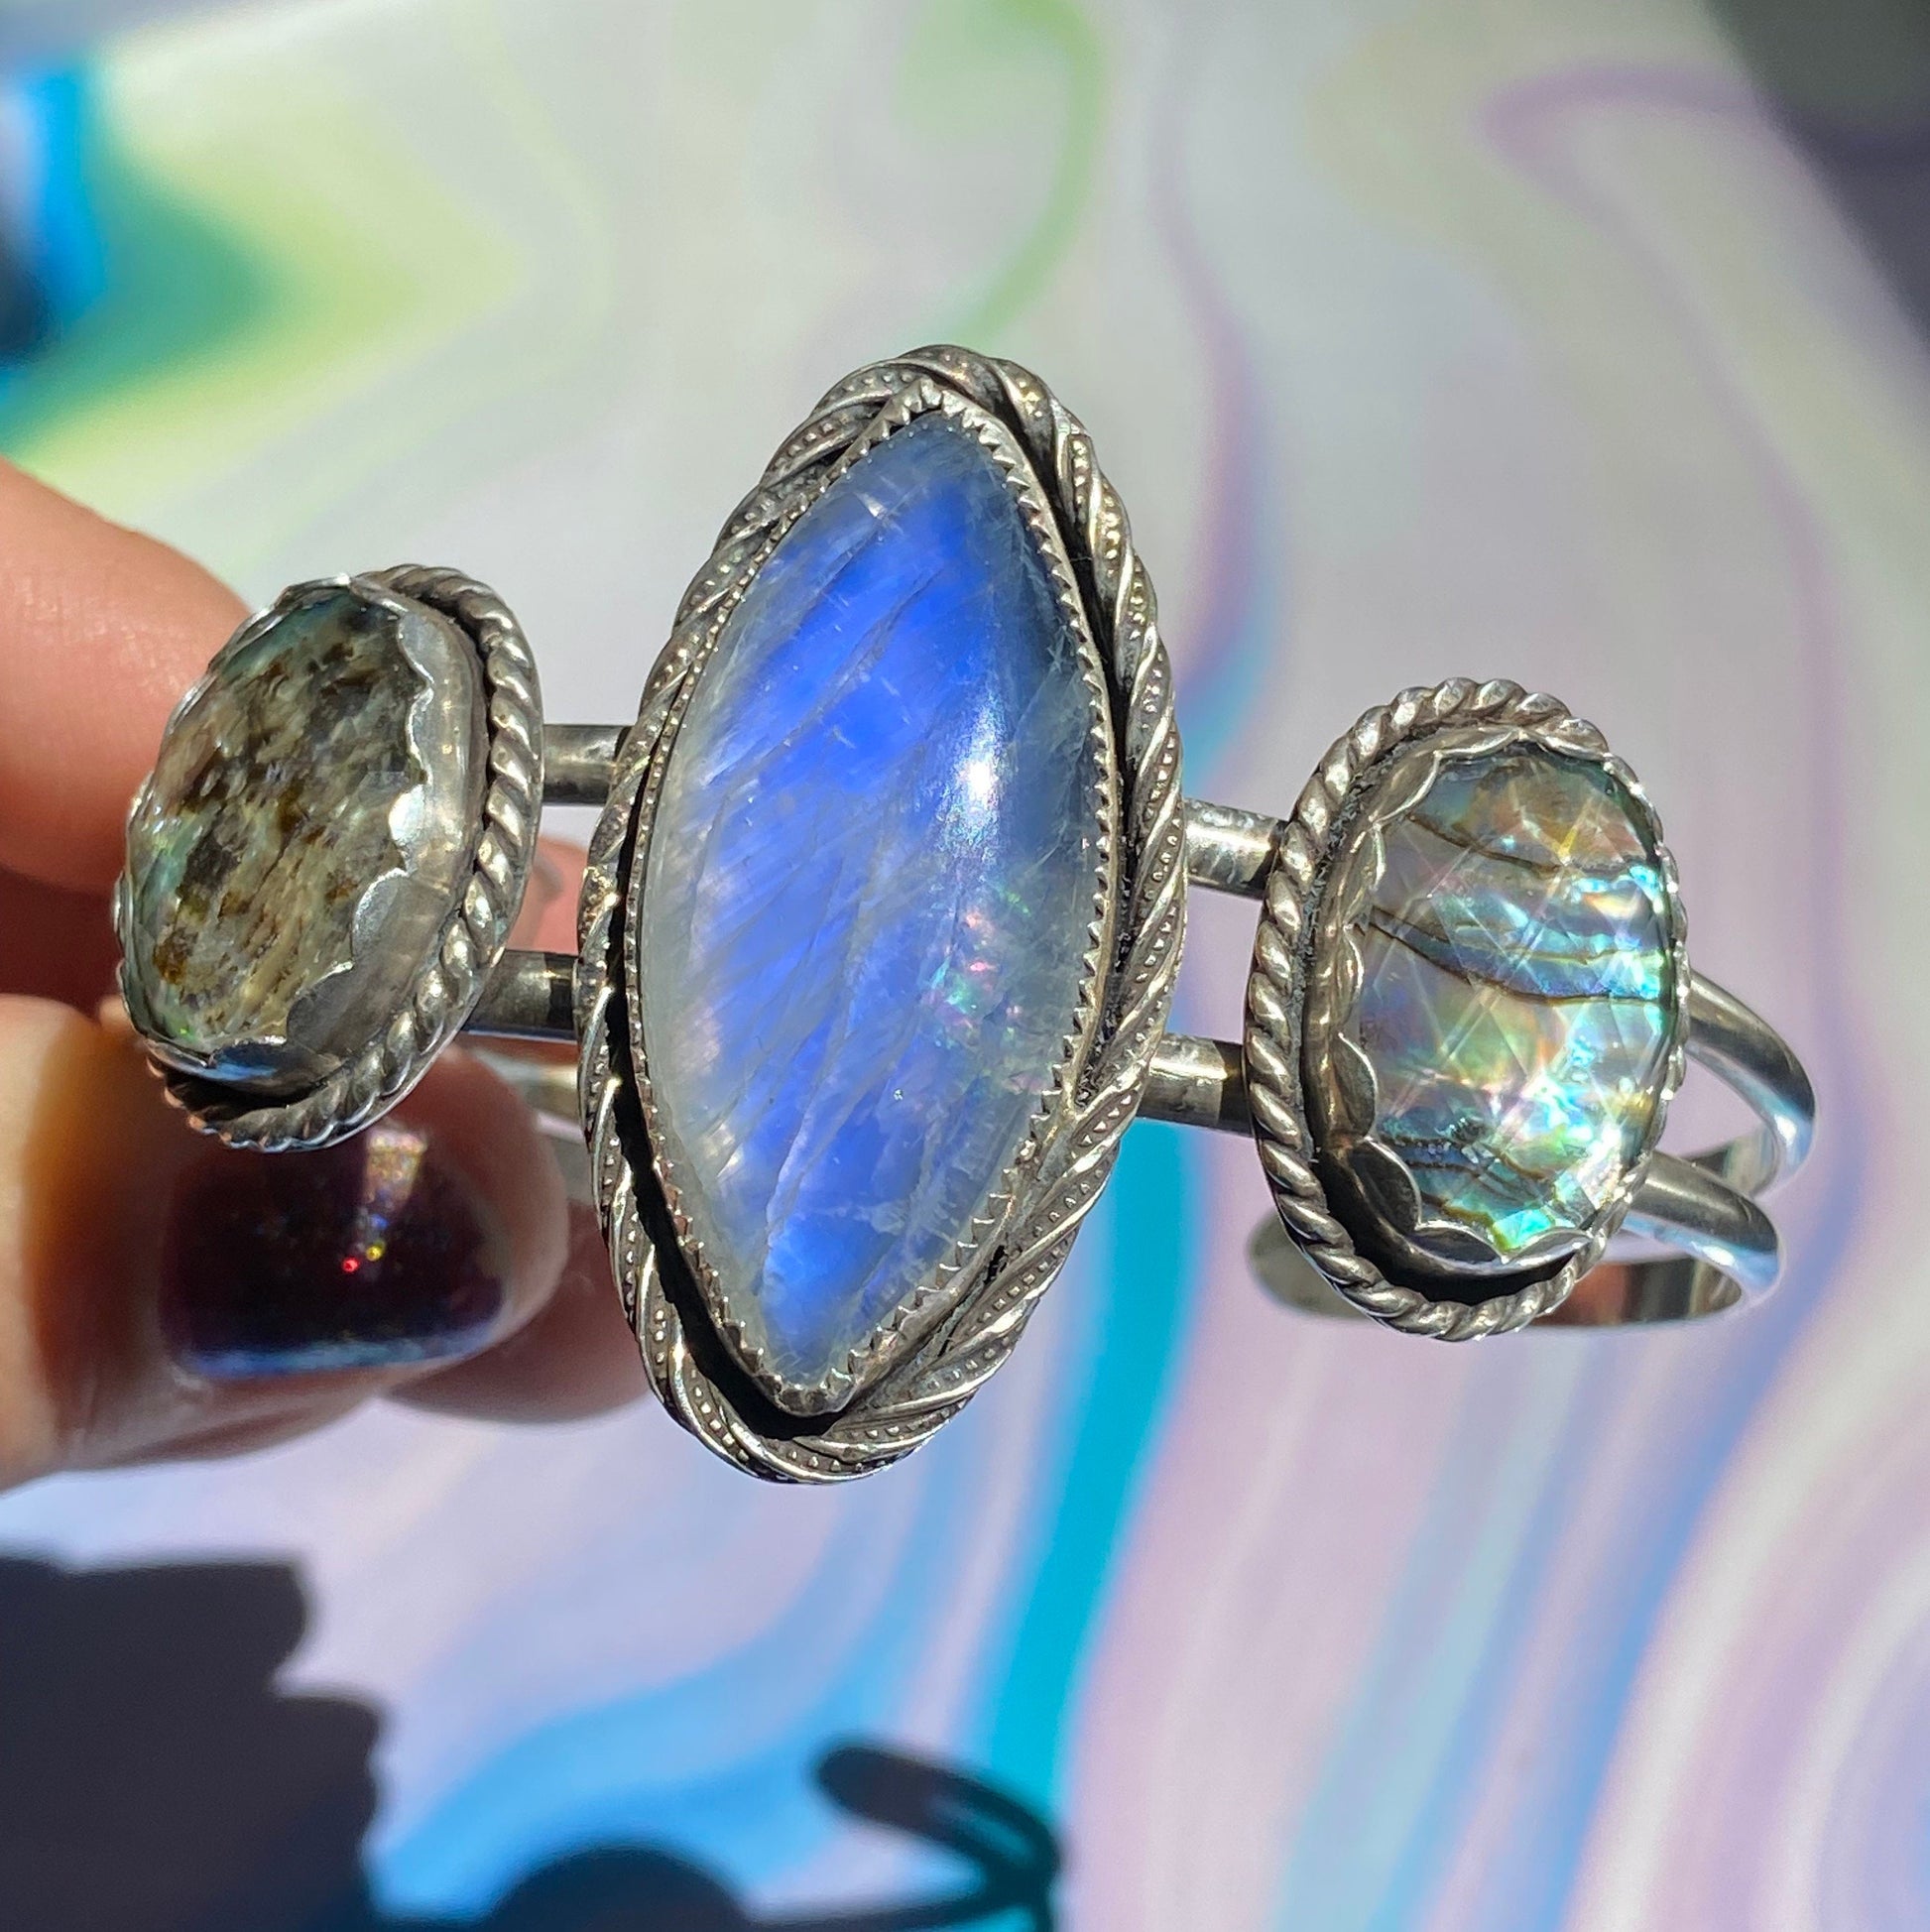 Moonstone and Abalone/Quartz Doublet Cuff a Collecti – //Once Upon Dream thebohemianfairie